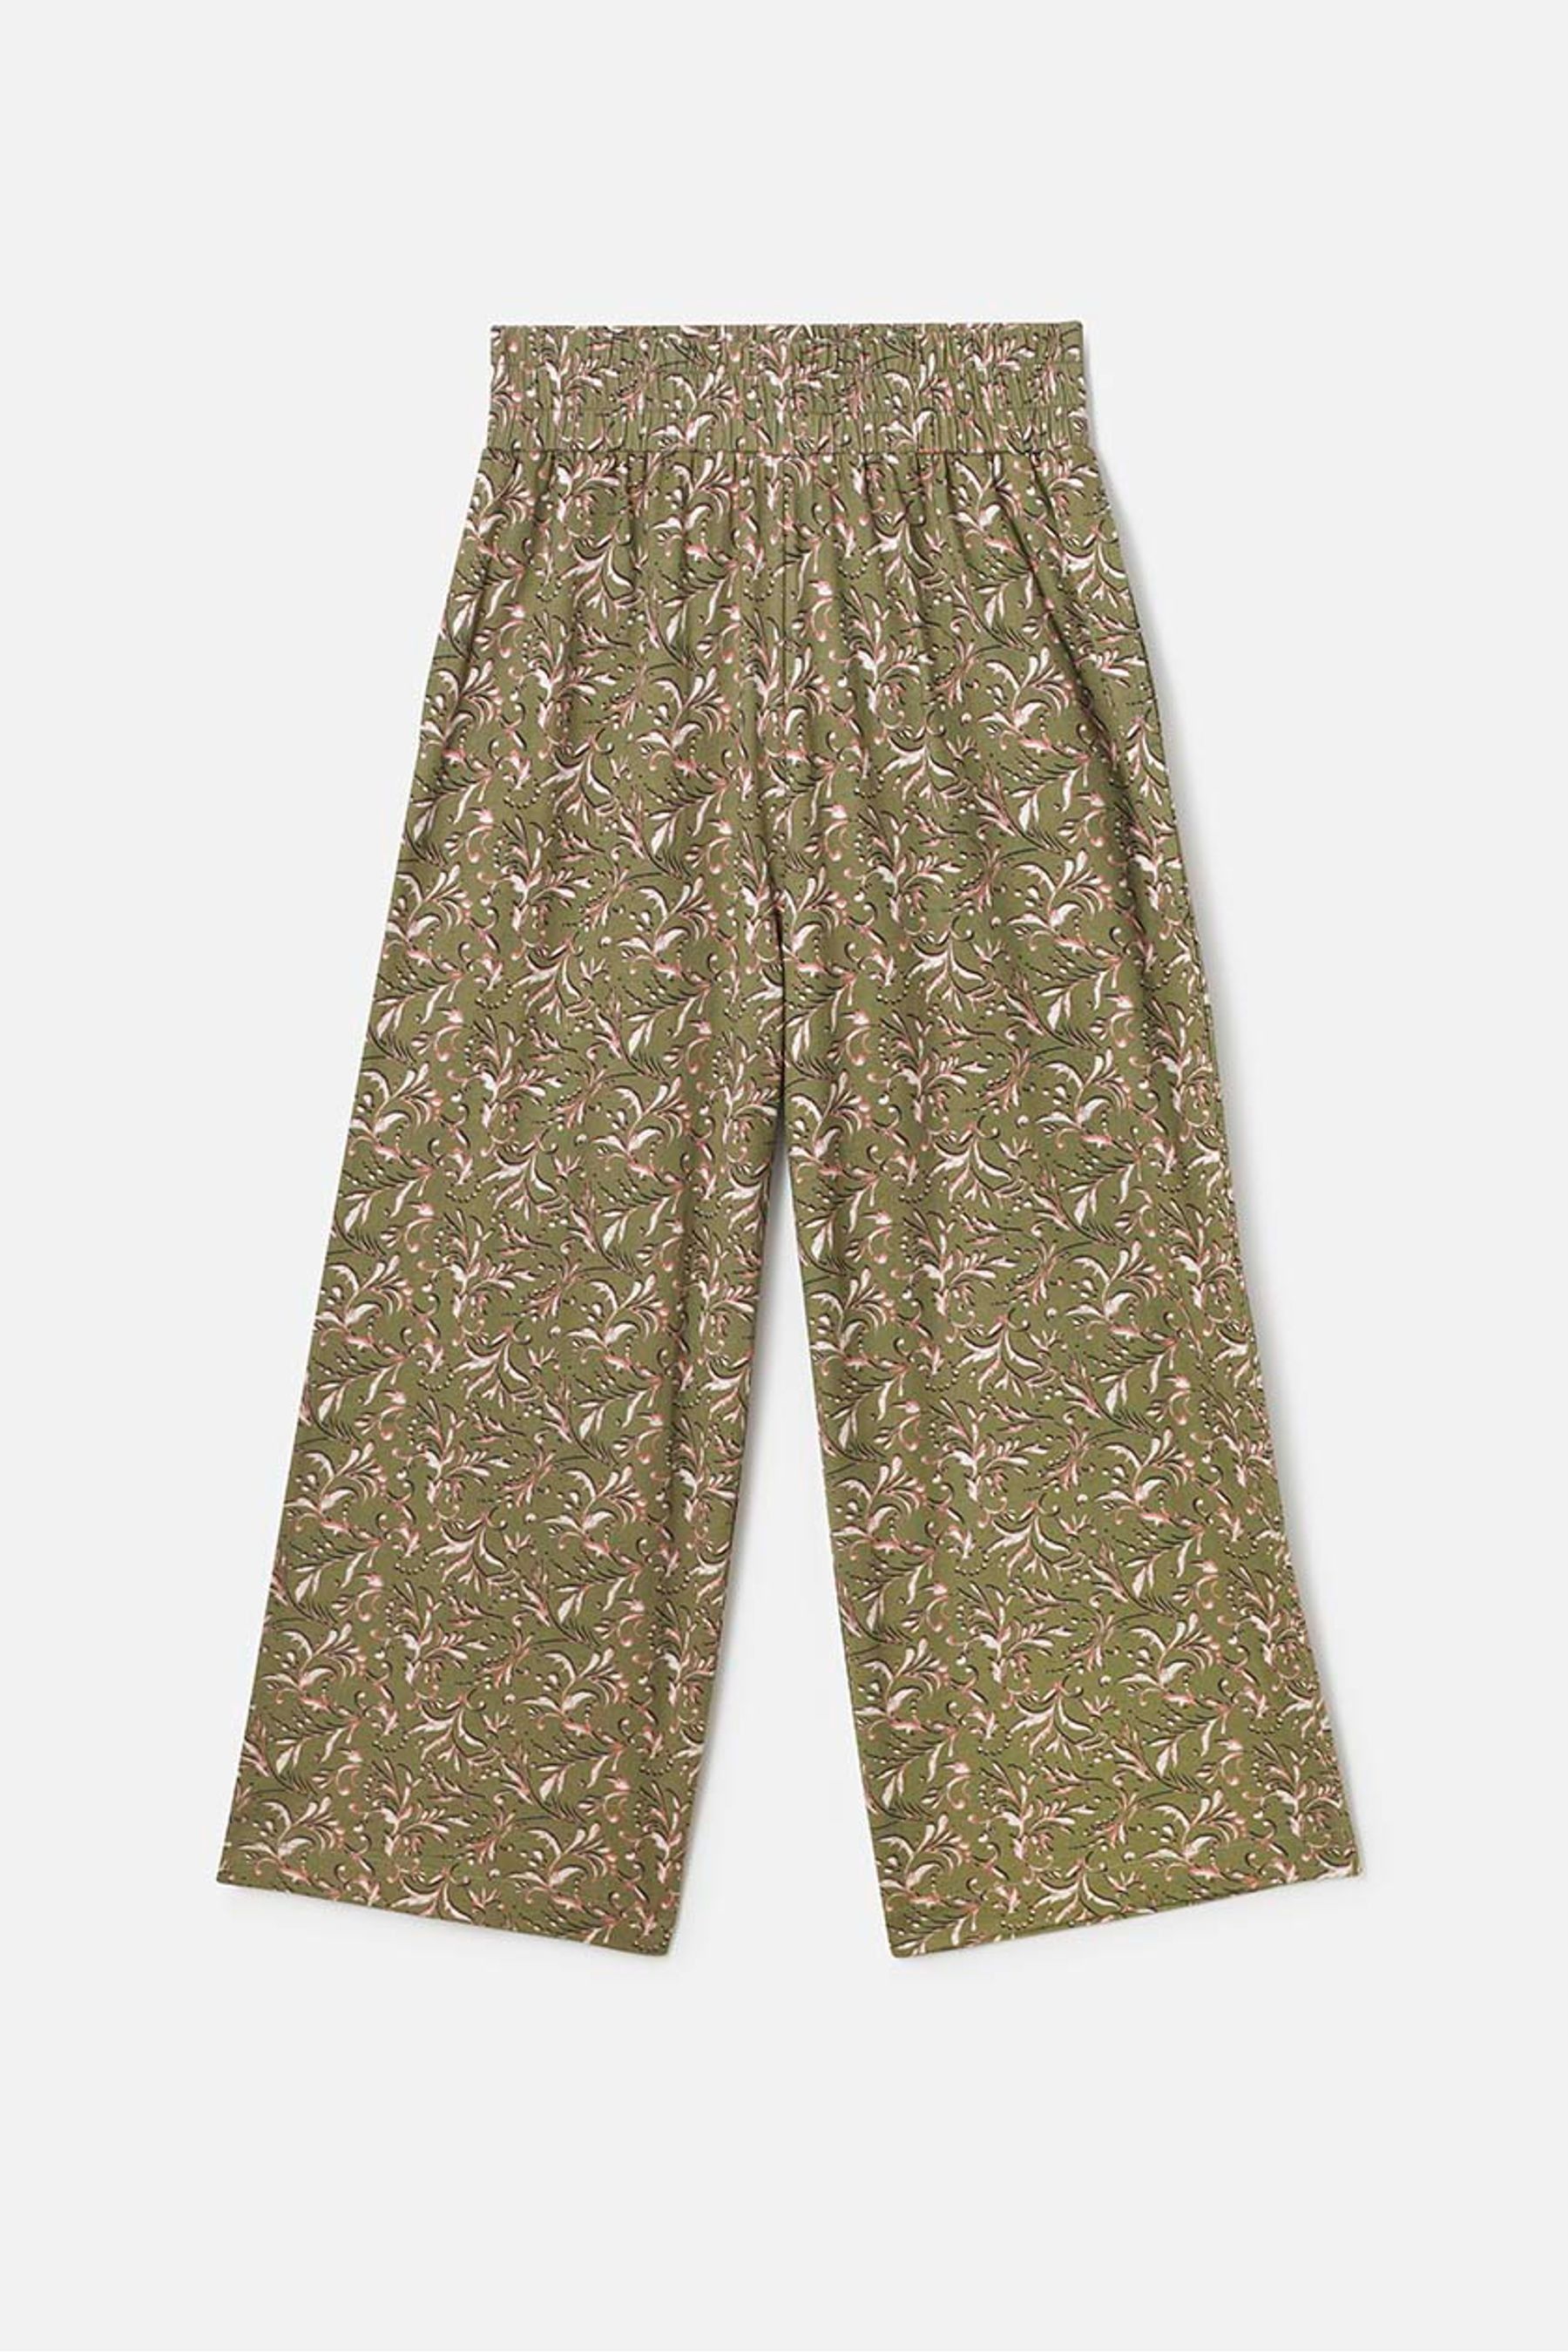 Buy Thought Green Eivissa Organic Jersey Lounge Trousers from Next Ireland